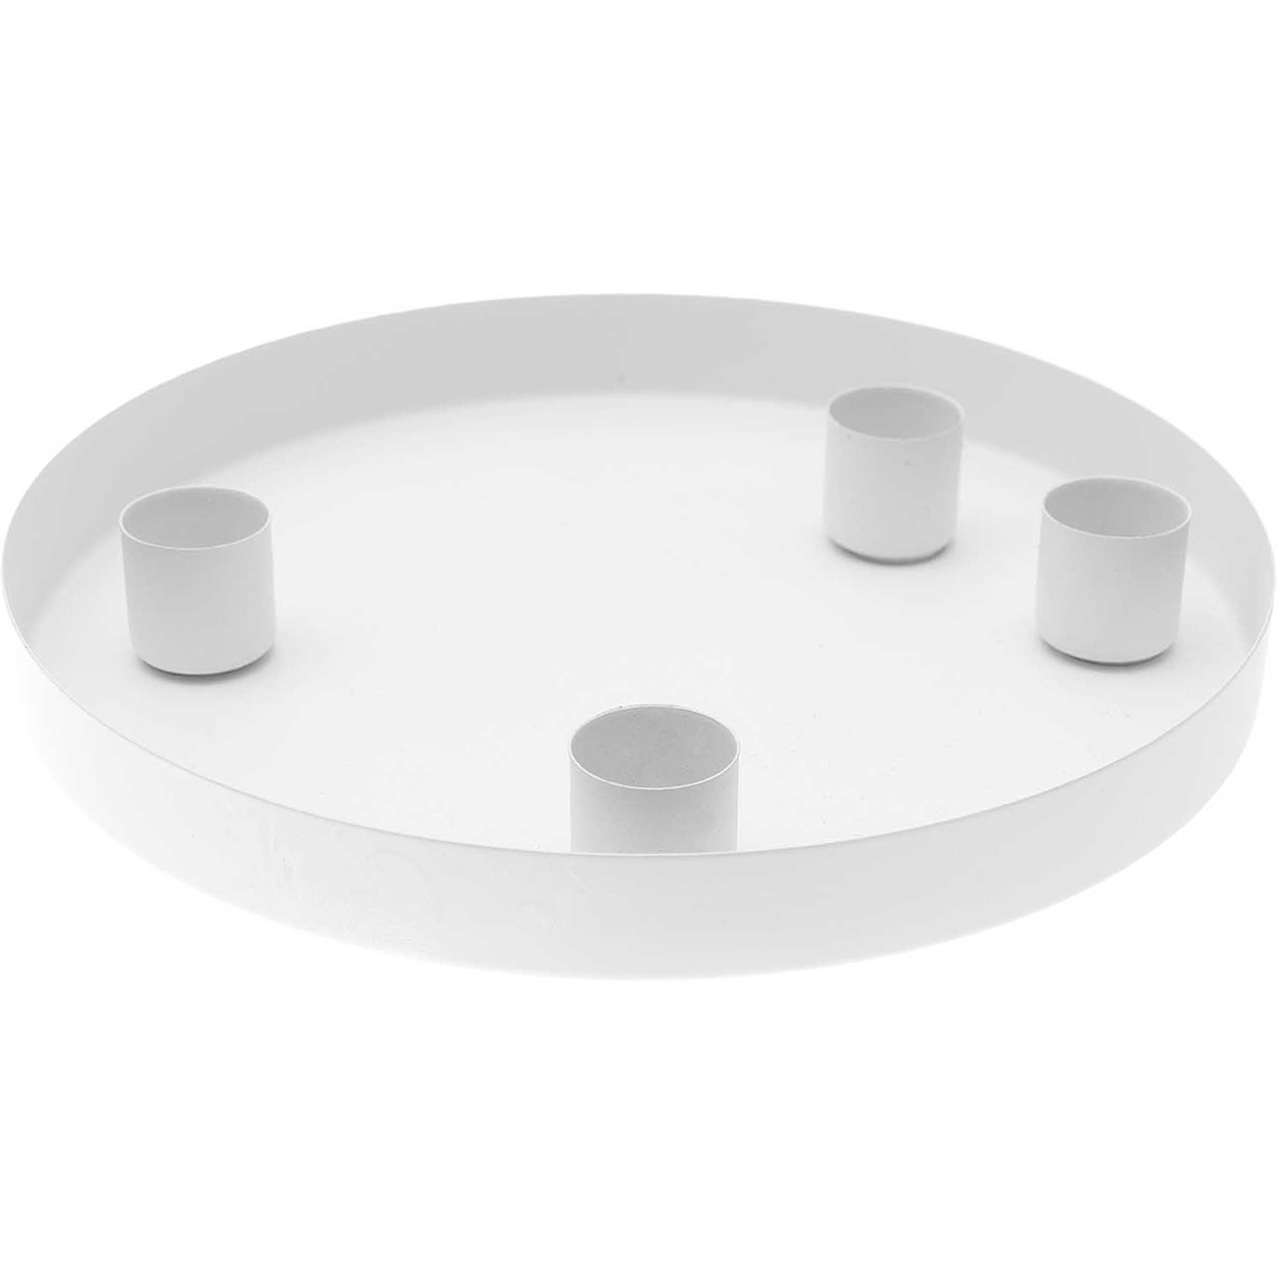 Metal Tray and Candle Holders - White